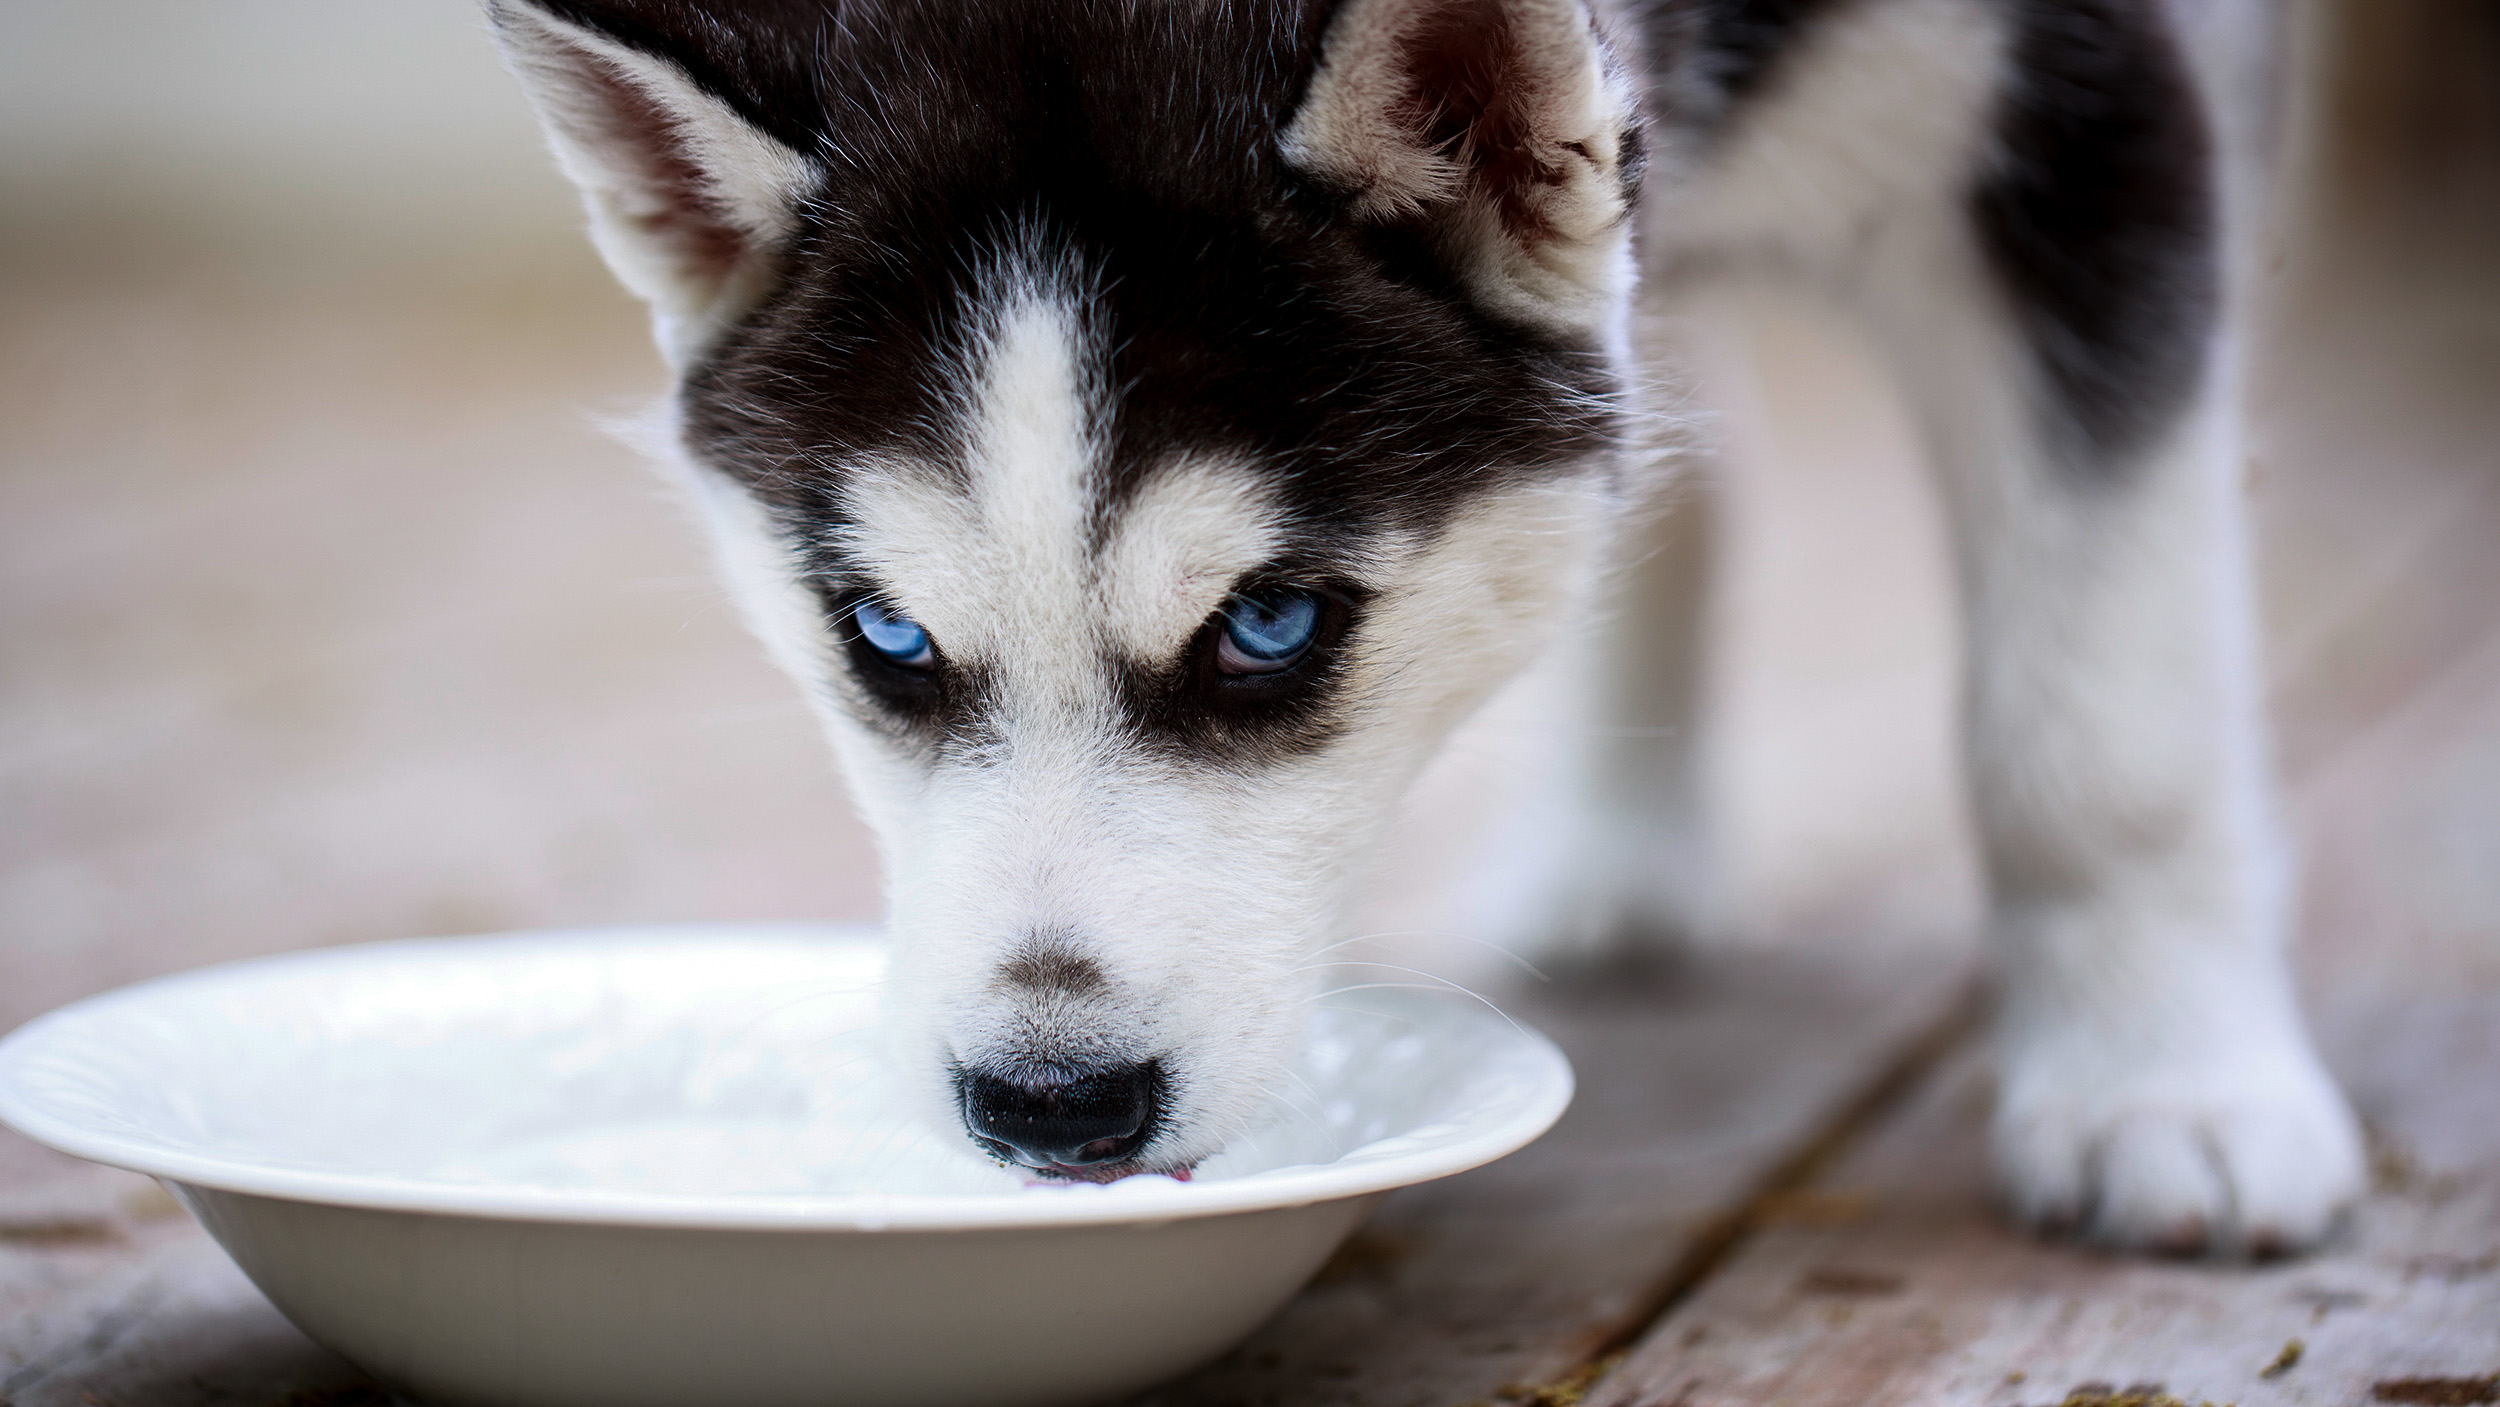 Siberian Husky standing outdoors drinking from a white bowl.